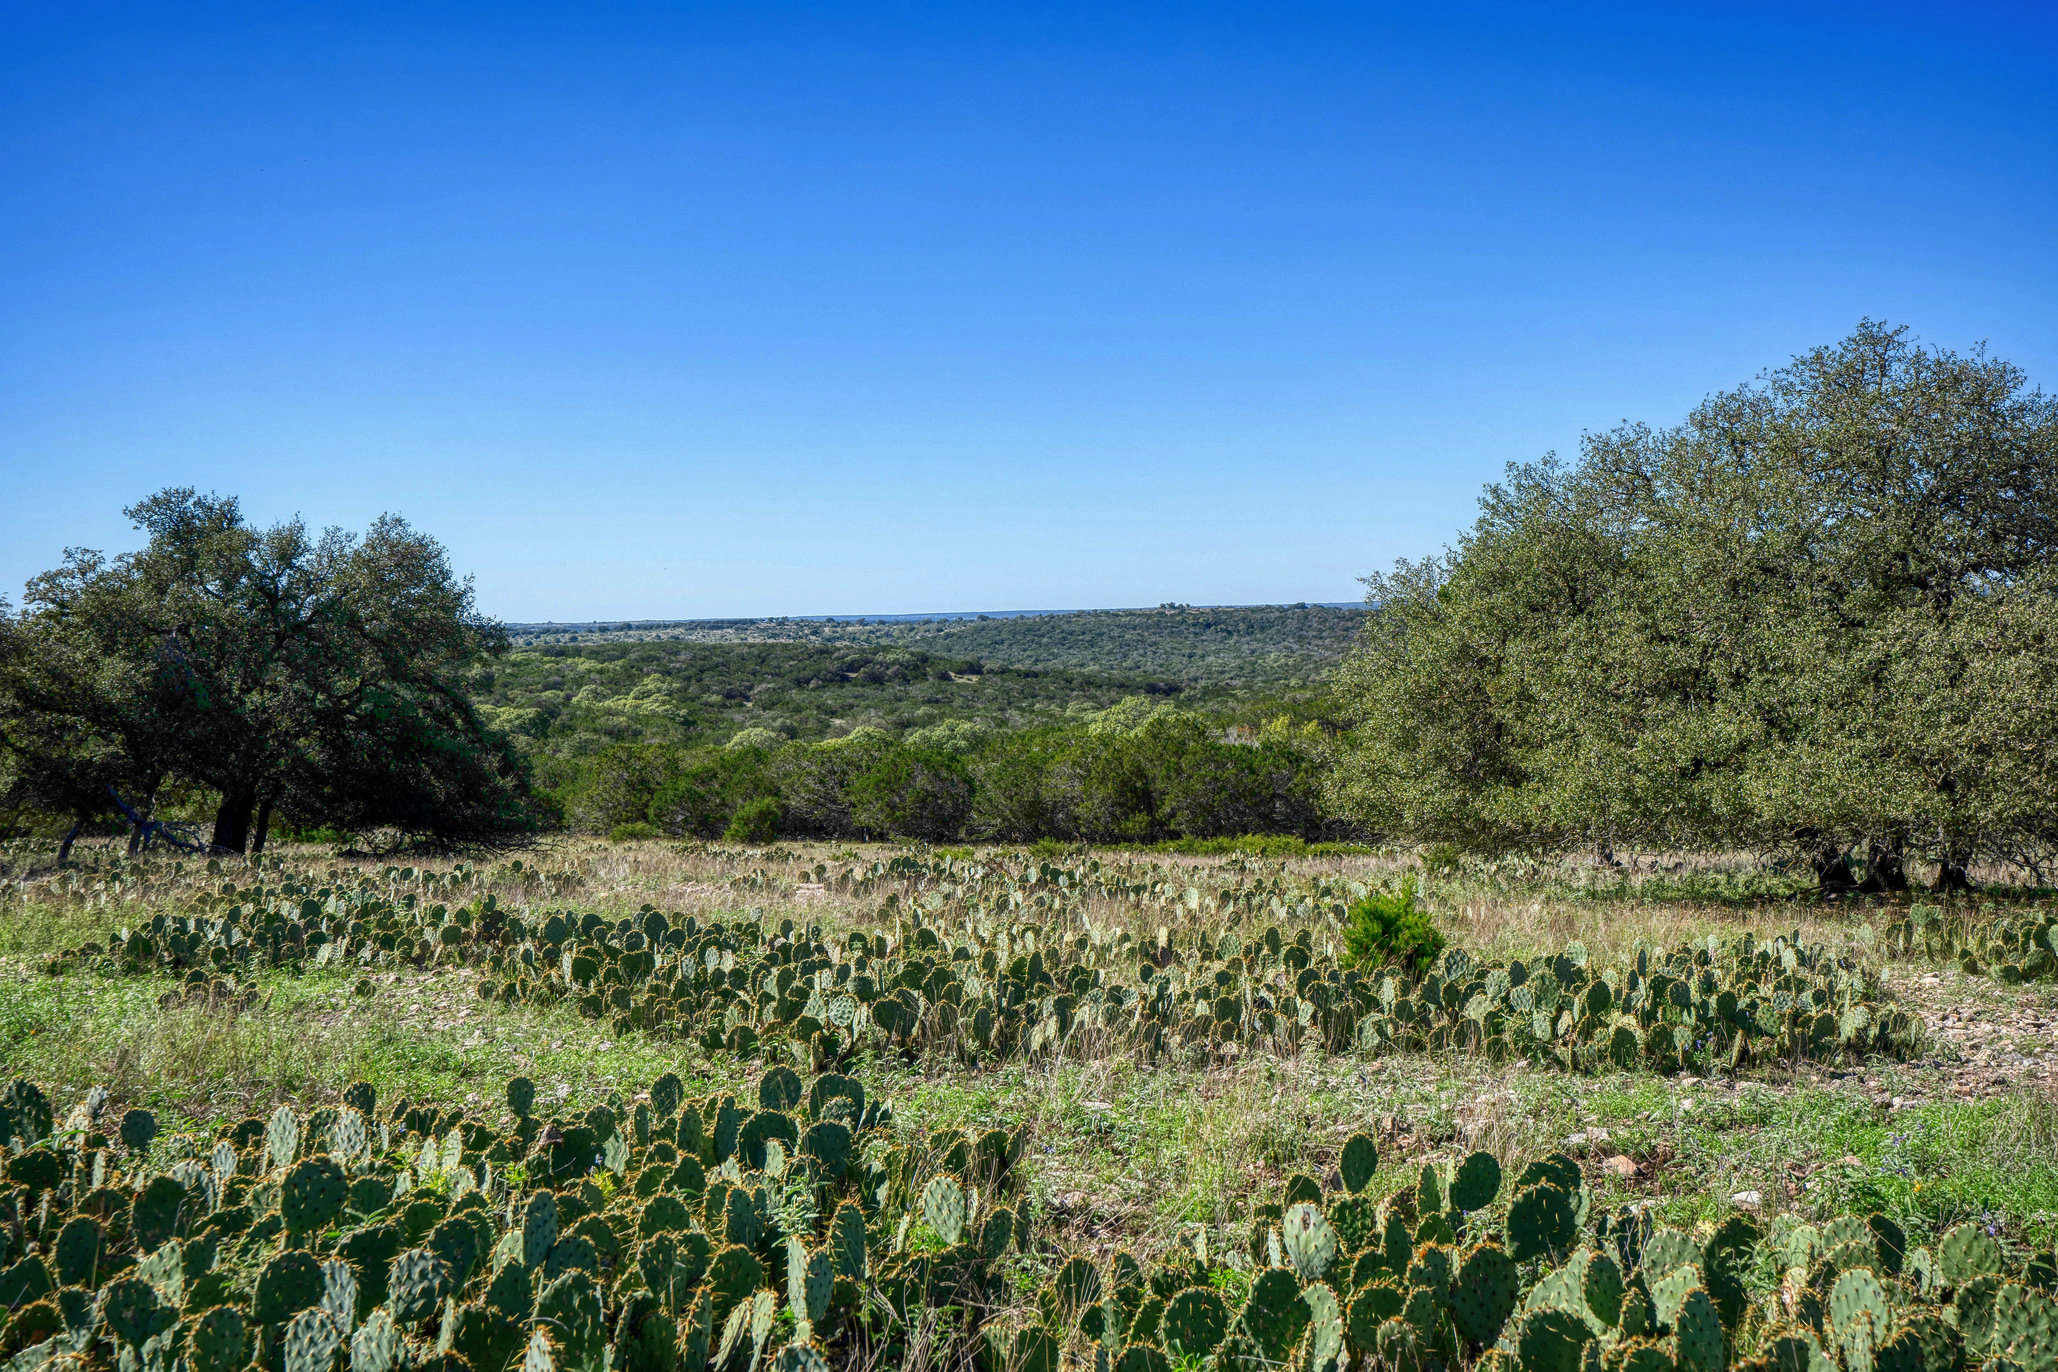 205 Acres in Hunt TX.  Listed with Gail Stone Realty in Bandera, TX. 830-796-4640